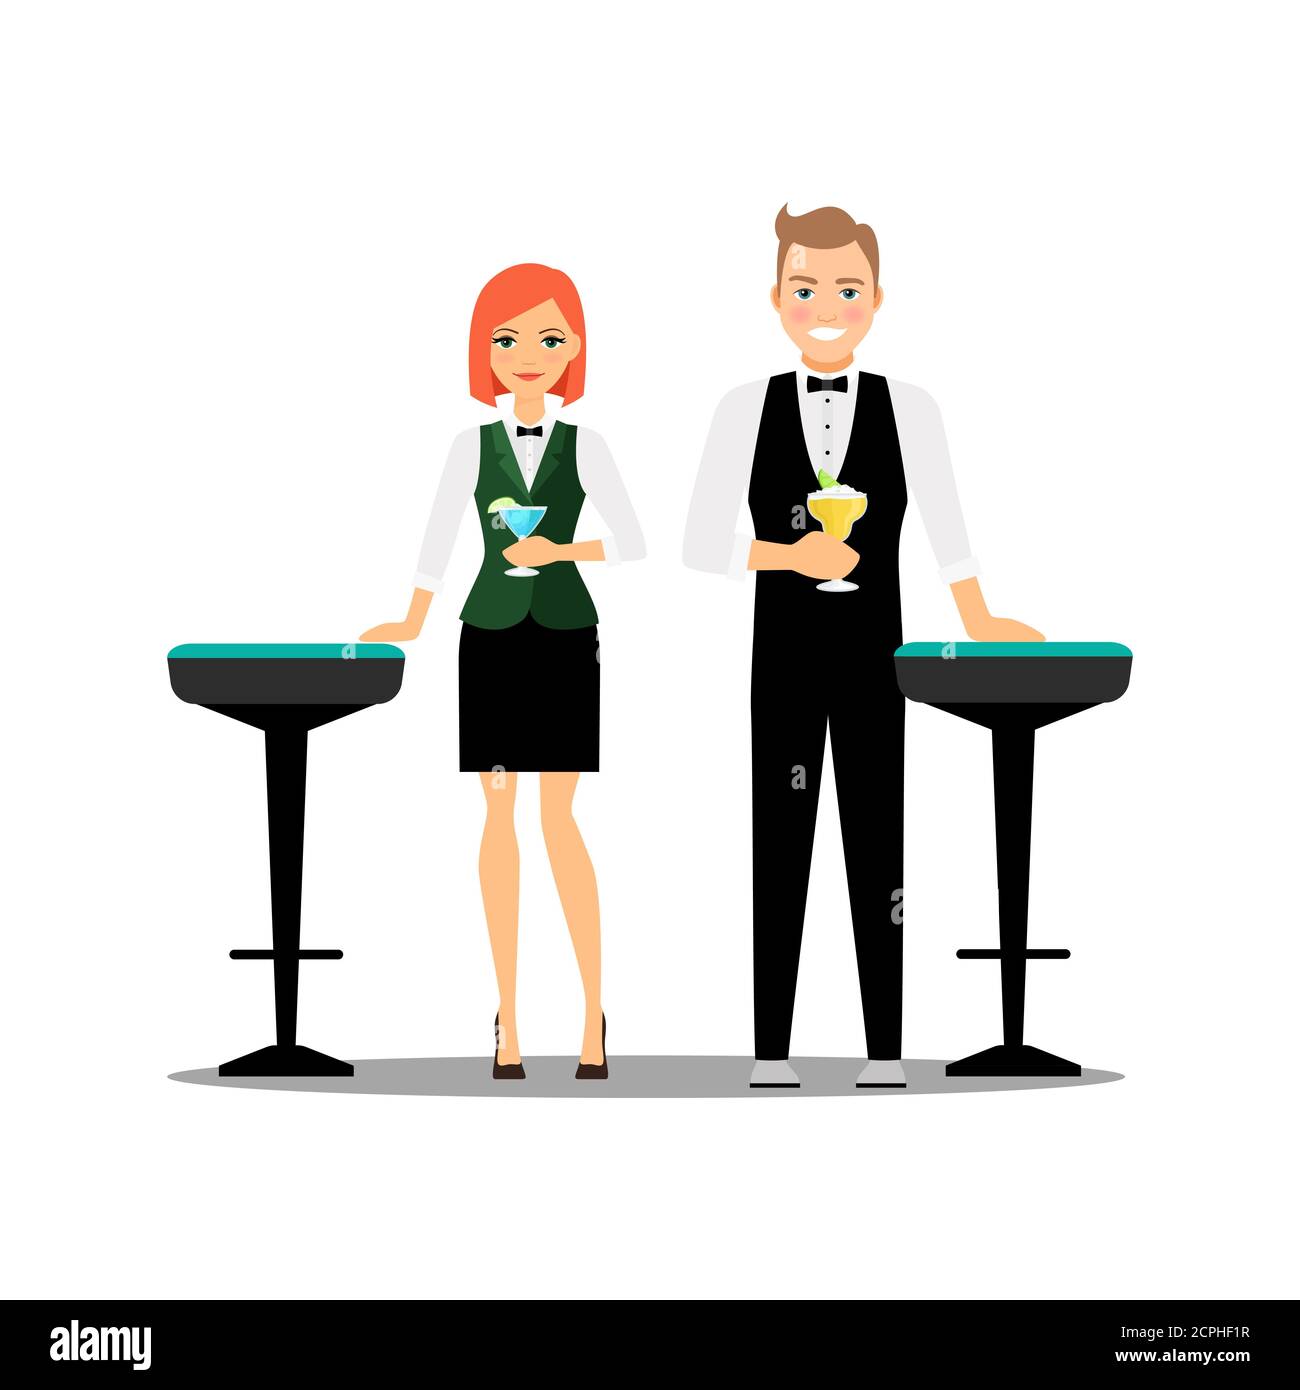 Bartenders couple with cocktails and bar chairs isolated on white background. Bartender with cocktail alcohol, chair for pub and barman illustration Stock Vector